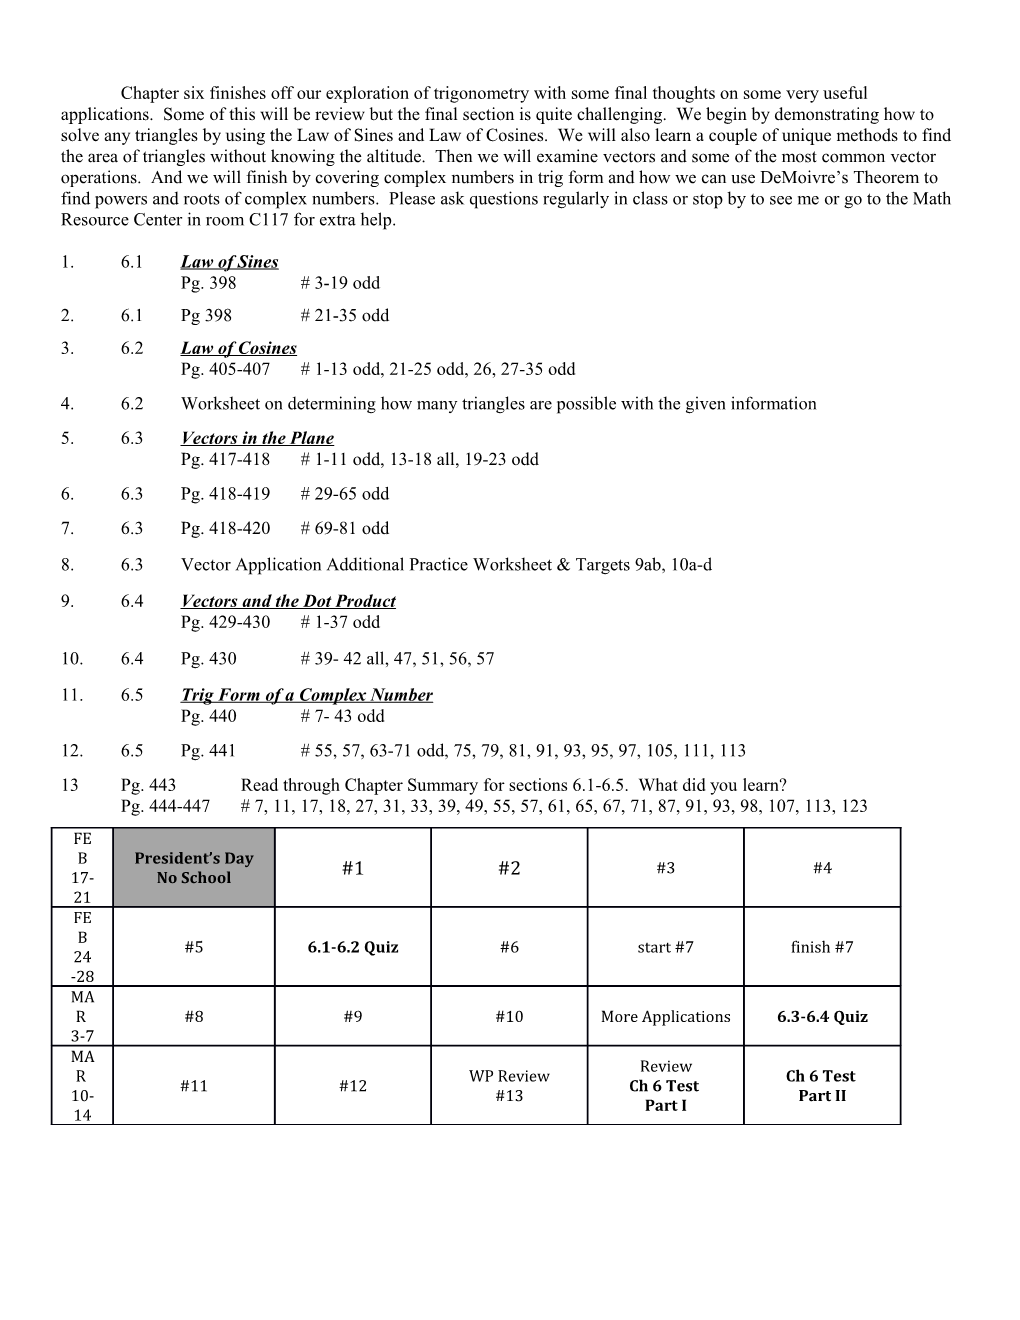 4.6.2Worksheet on Determining How Many Triangles Are Possible with the Given Information